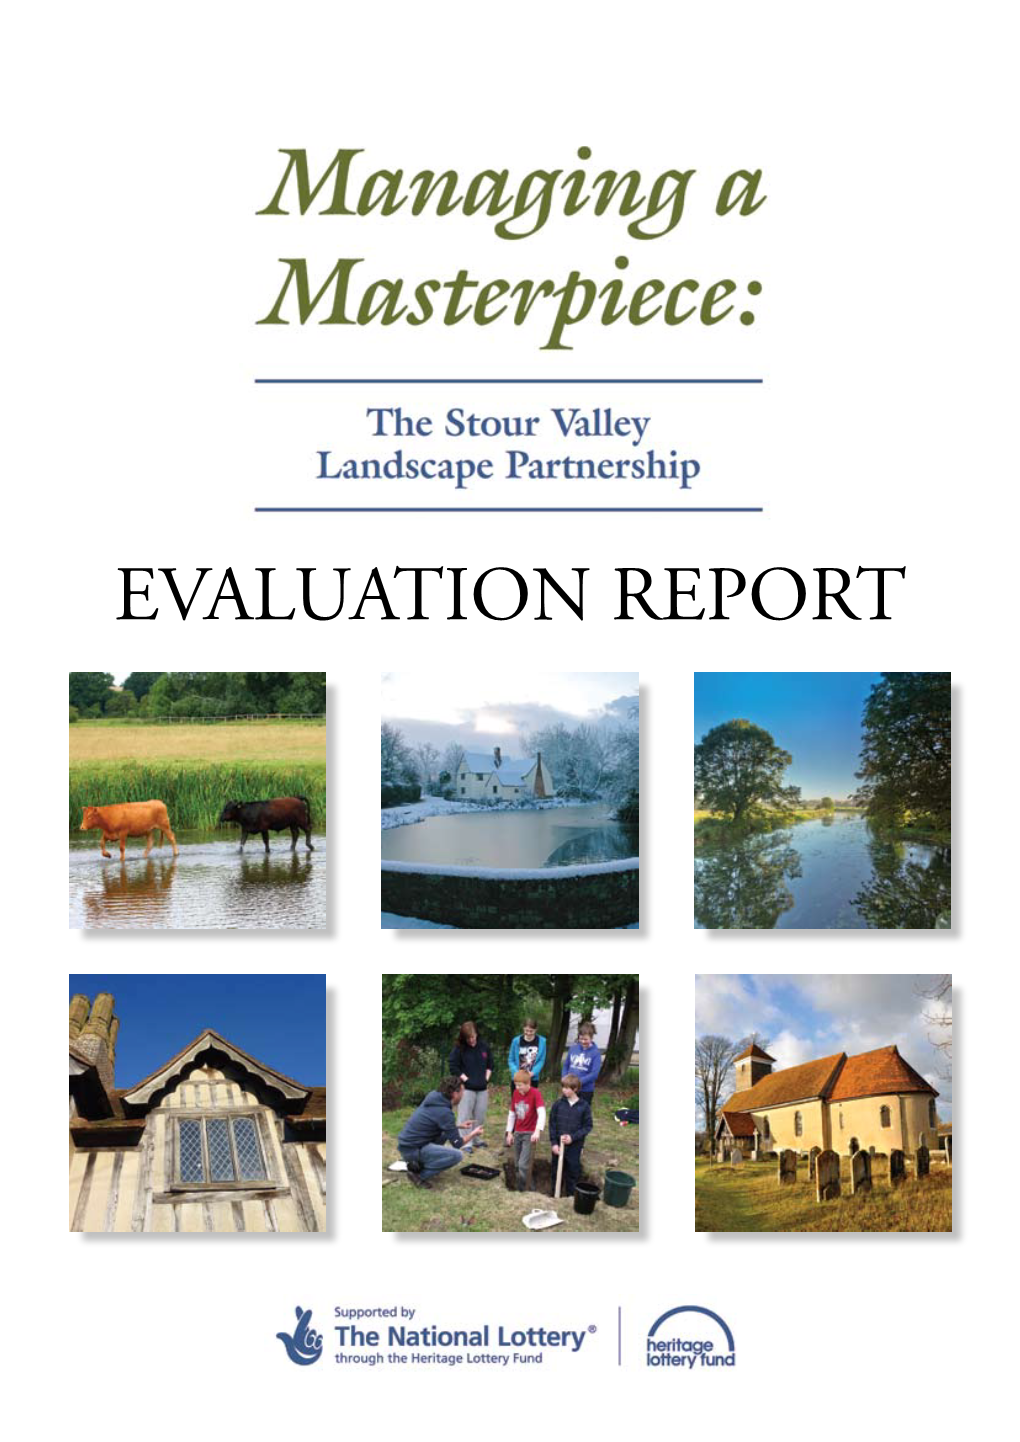 EVALUATION REPORT Evaluation Report Compiled by James Parry